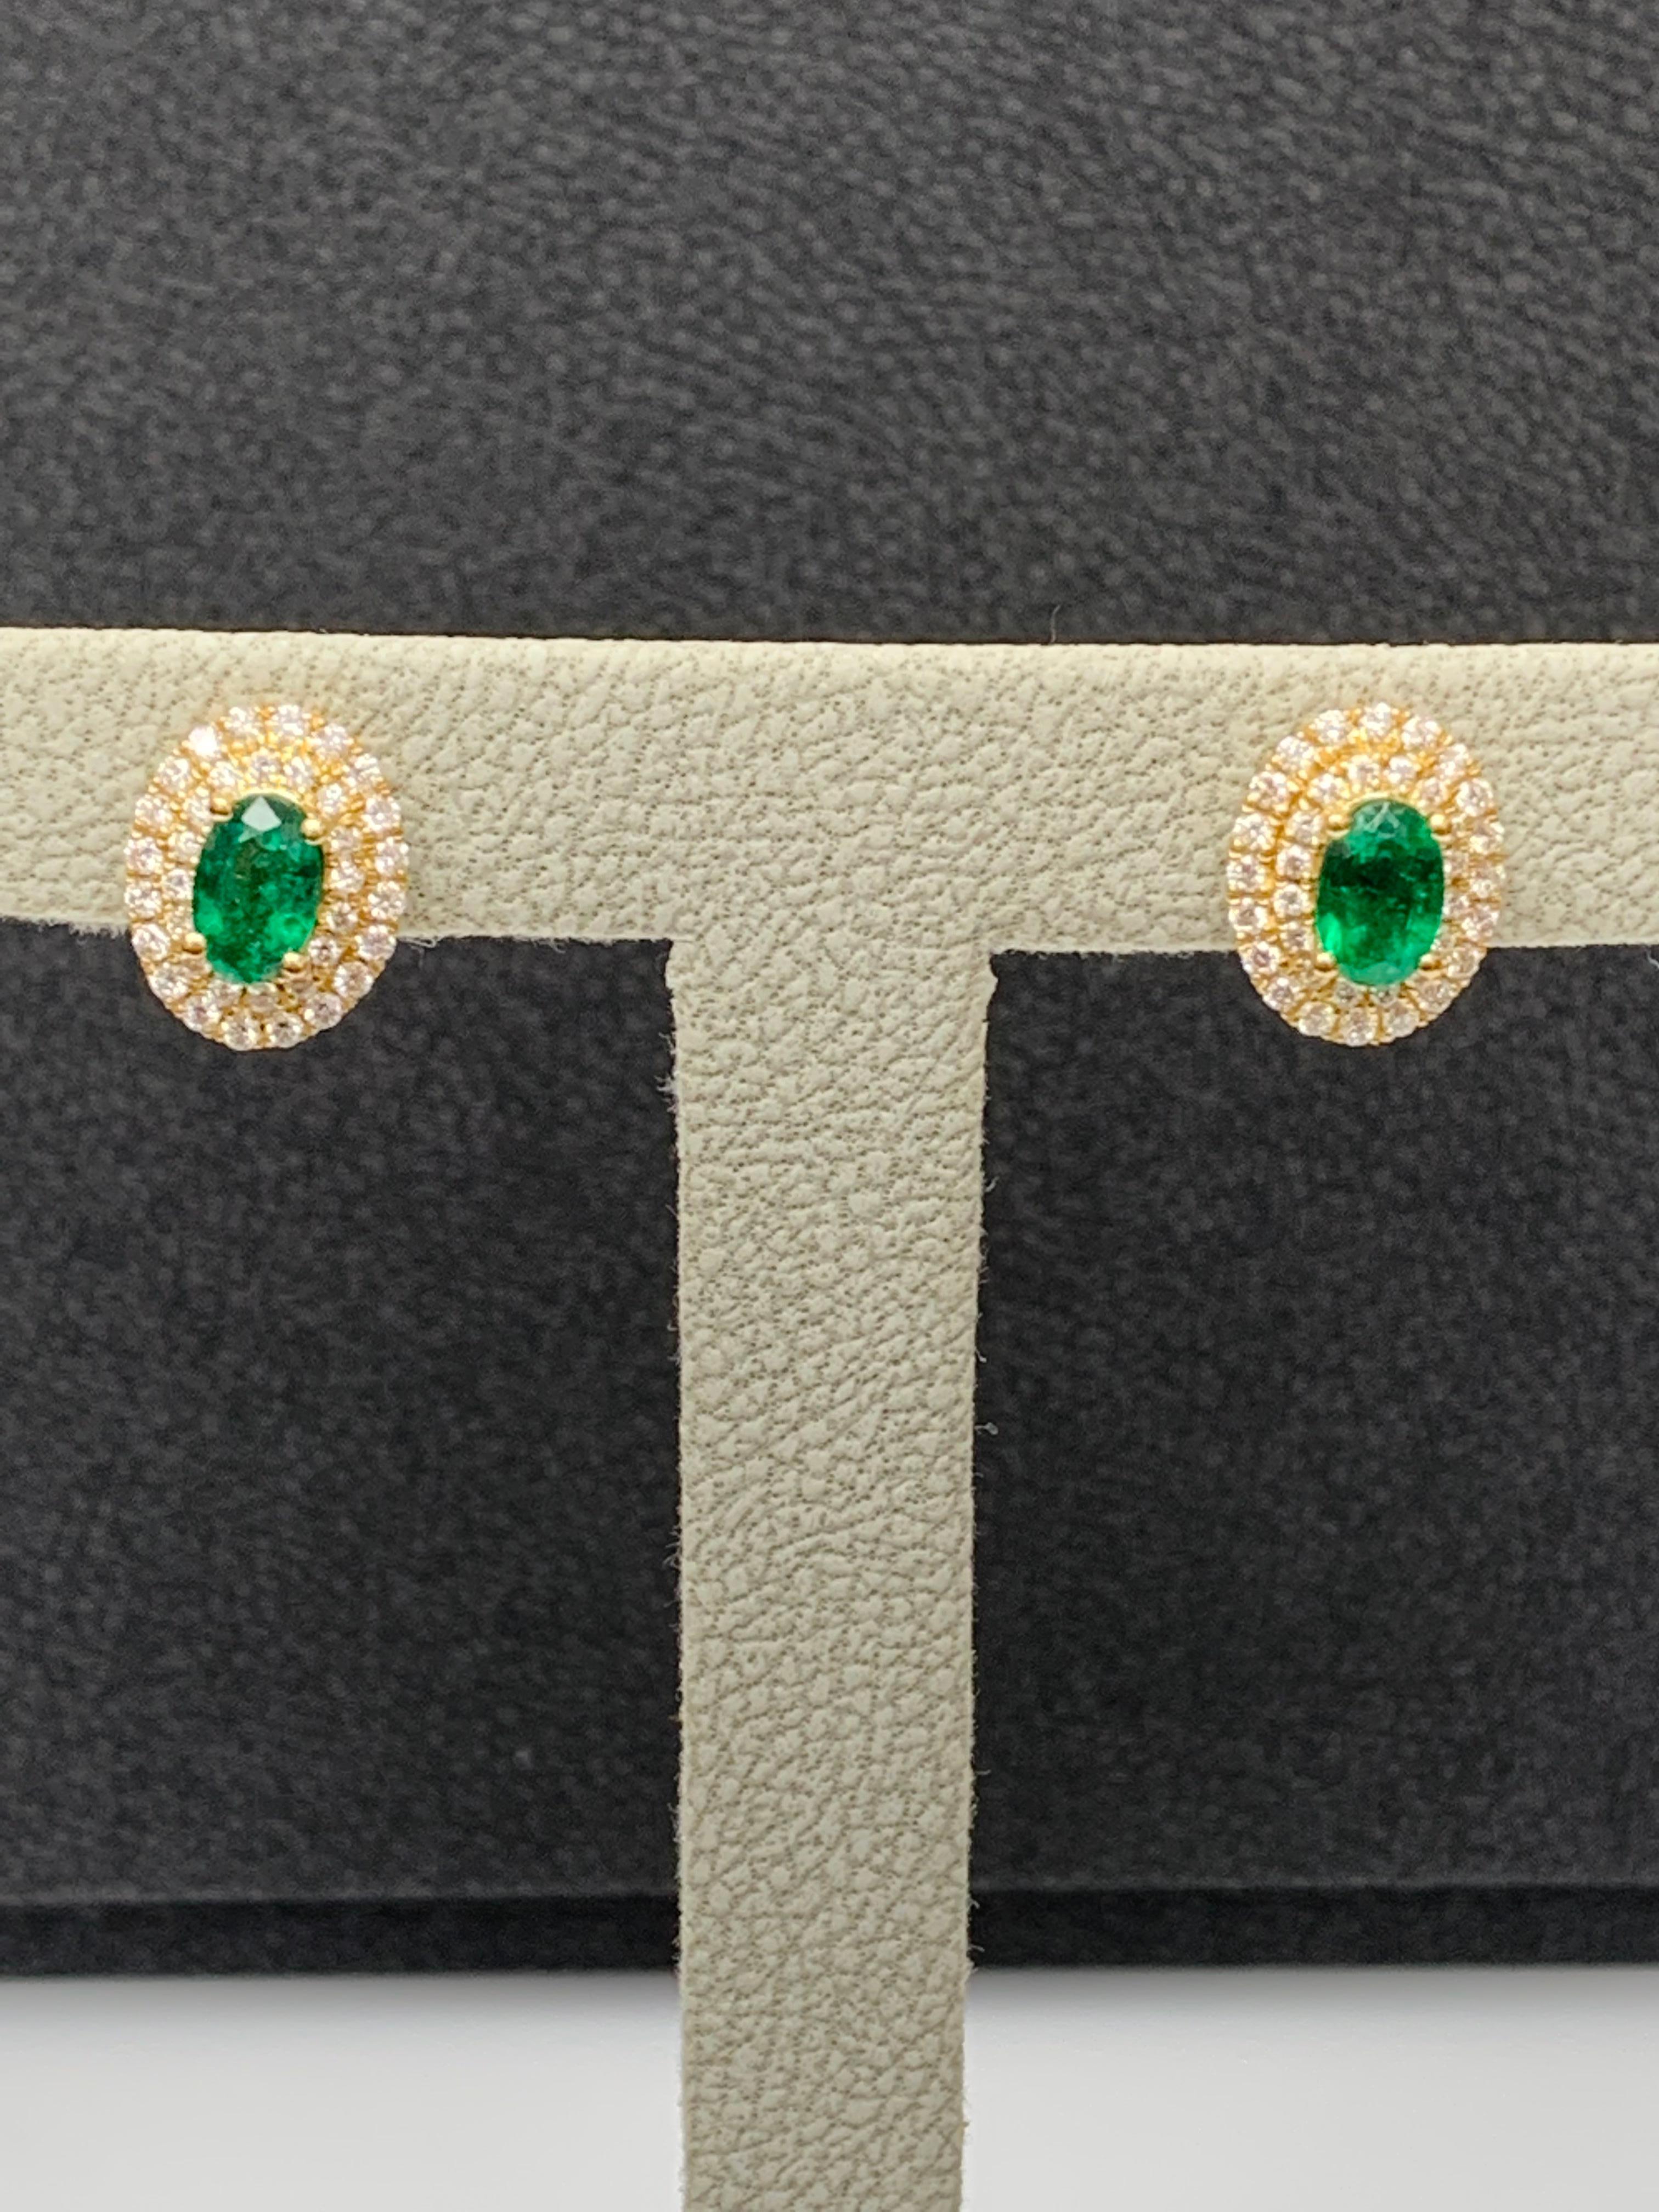 0.89 Carat Oval Cut Emerald and Diamond Stud Earrings in 18K Yellow Gold For Sale 11